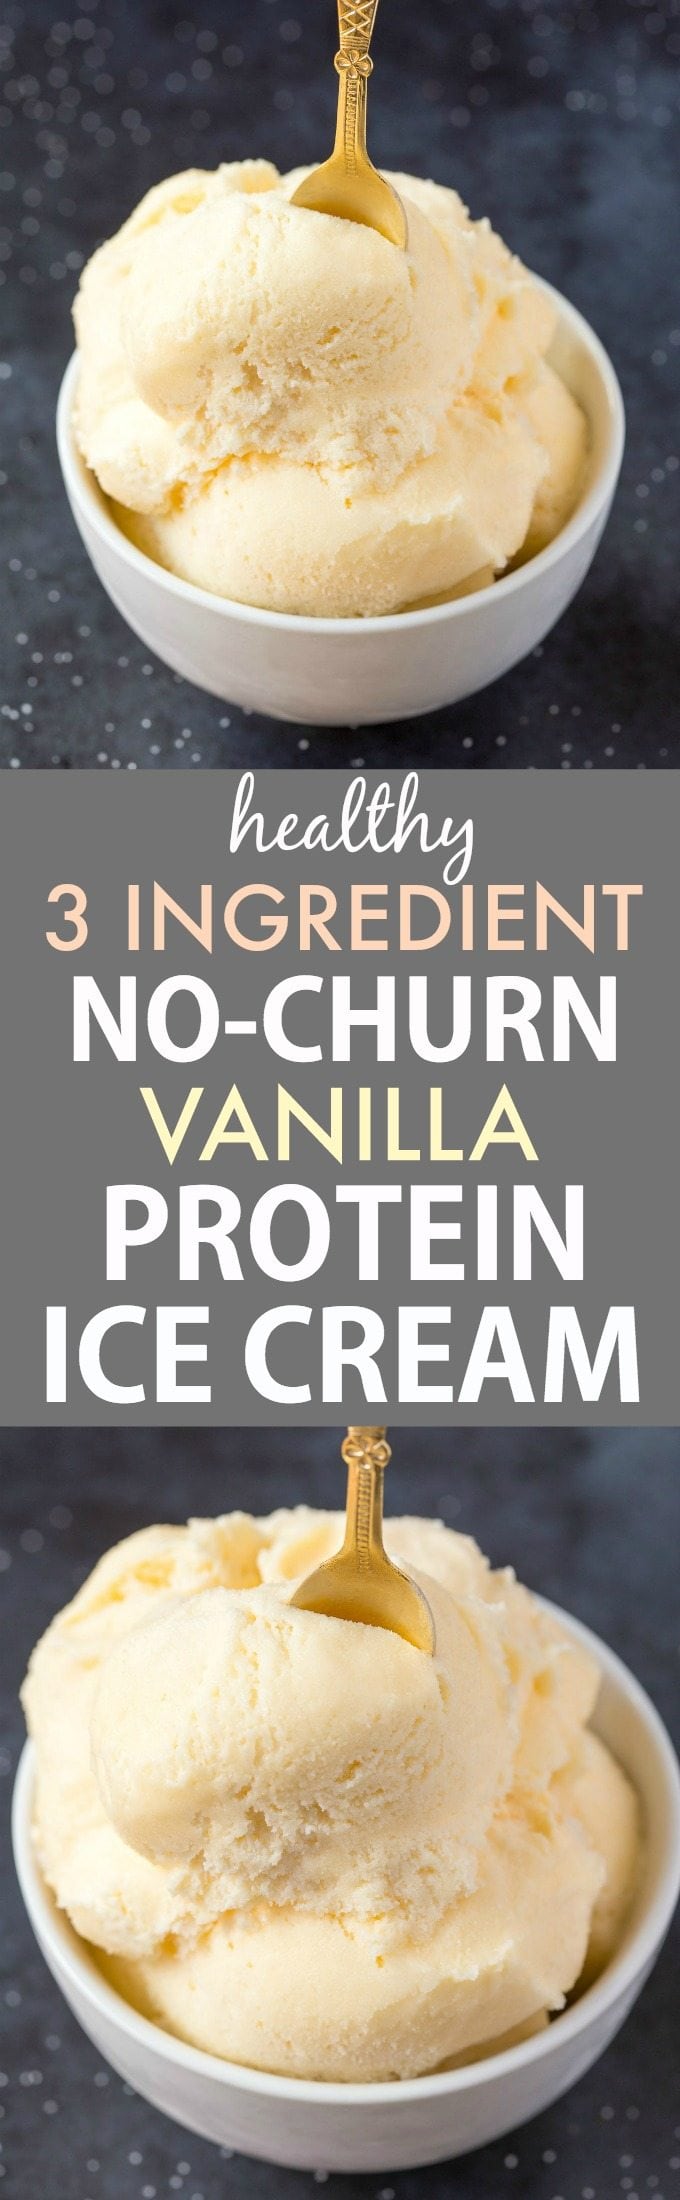 Healthy 3-Ingredient No Churn Vanilla Protein Ice Cream (V, GF, P, DF)- Guilt-free, low carb, dairy free and ready in minutes, this protein packed creamy frozen dessert can be enjoyed hard scoop or soft serve style- No ice cream maker! {vegan, gluten free, paleo recipe}- thebigmansworld.com